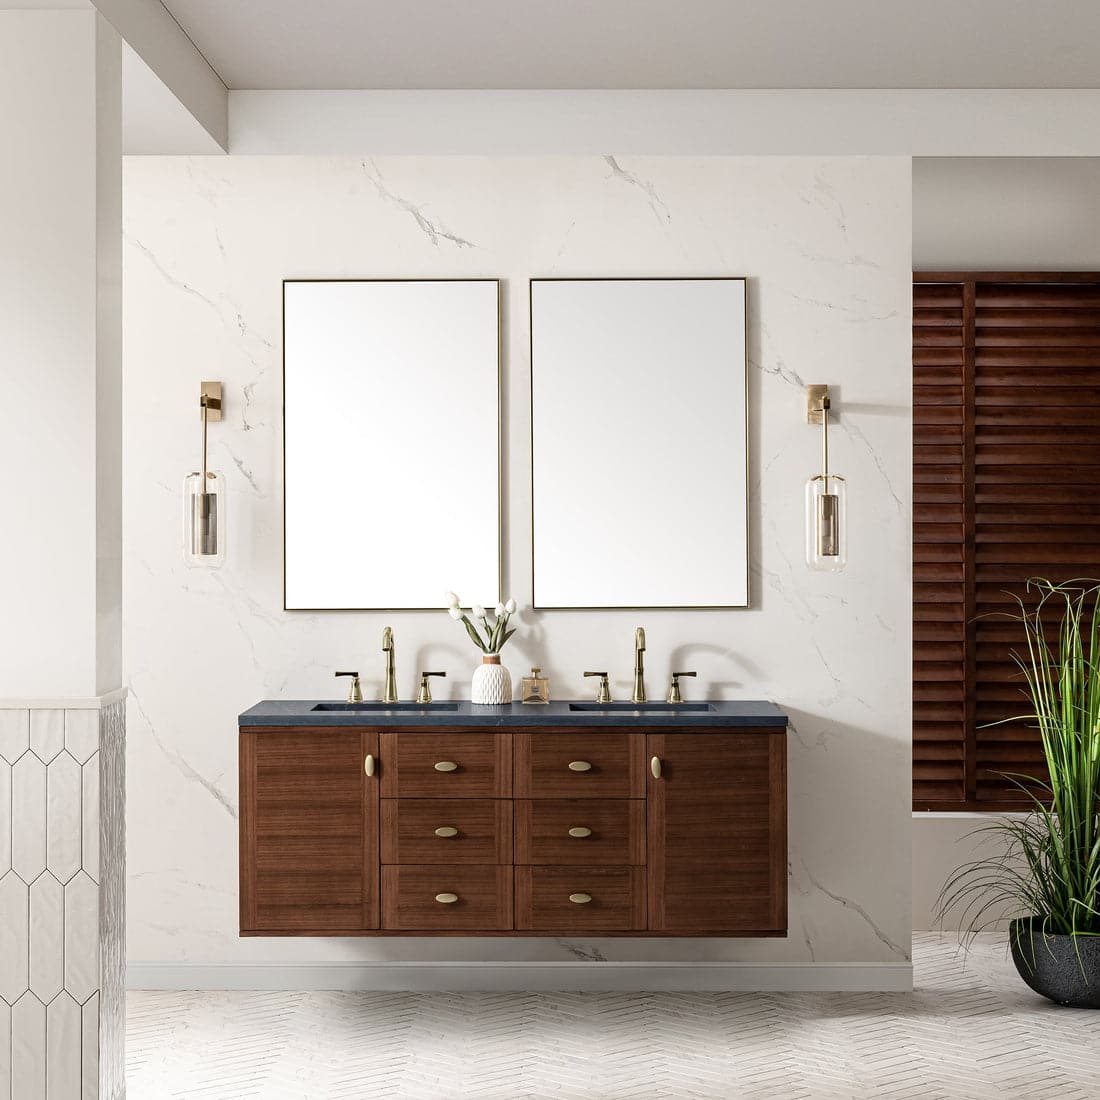 60" Amberly Brown wall-mounted Vanity